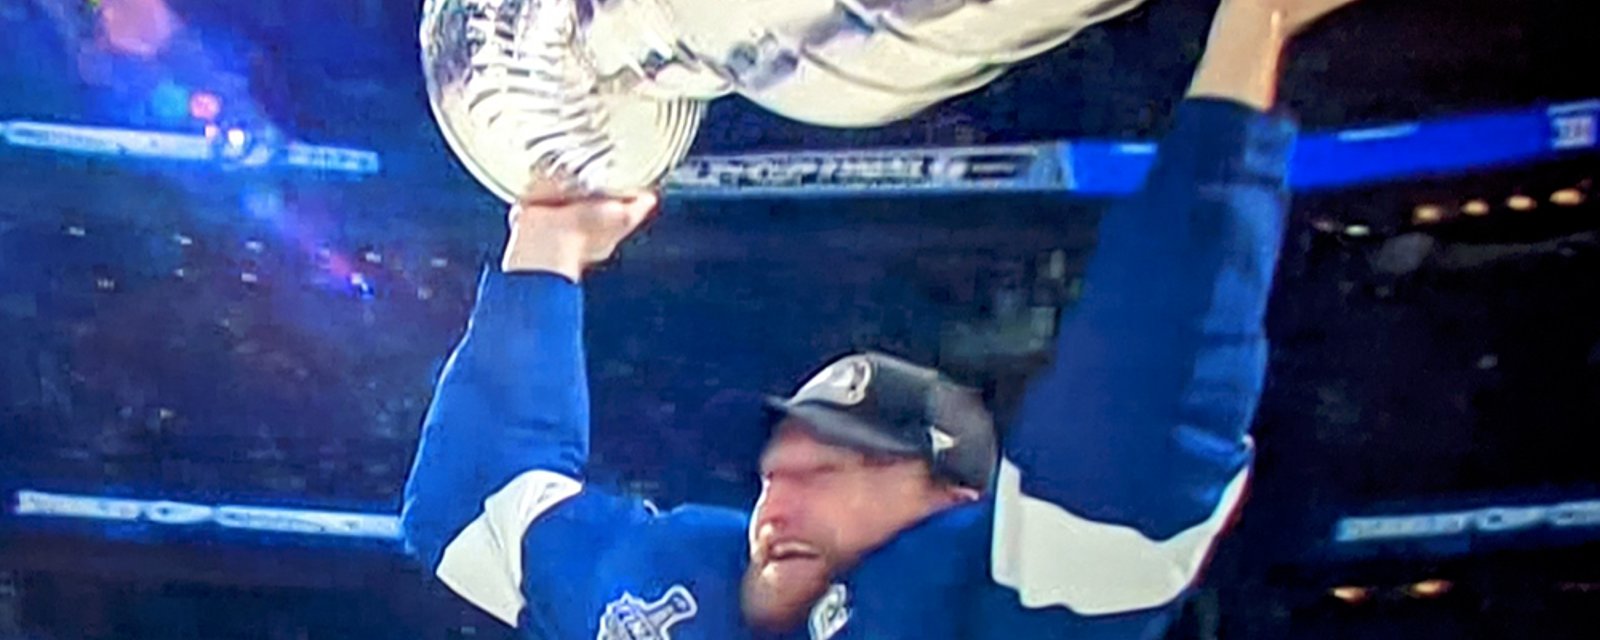 Tampa Bay Lighting captain Steven Stamkos lifts Stanley Cup in front of packed Amalie Arena 